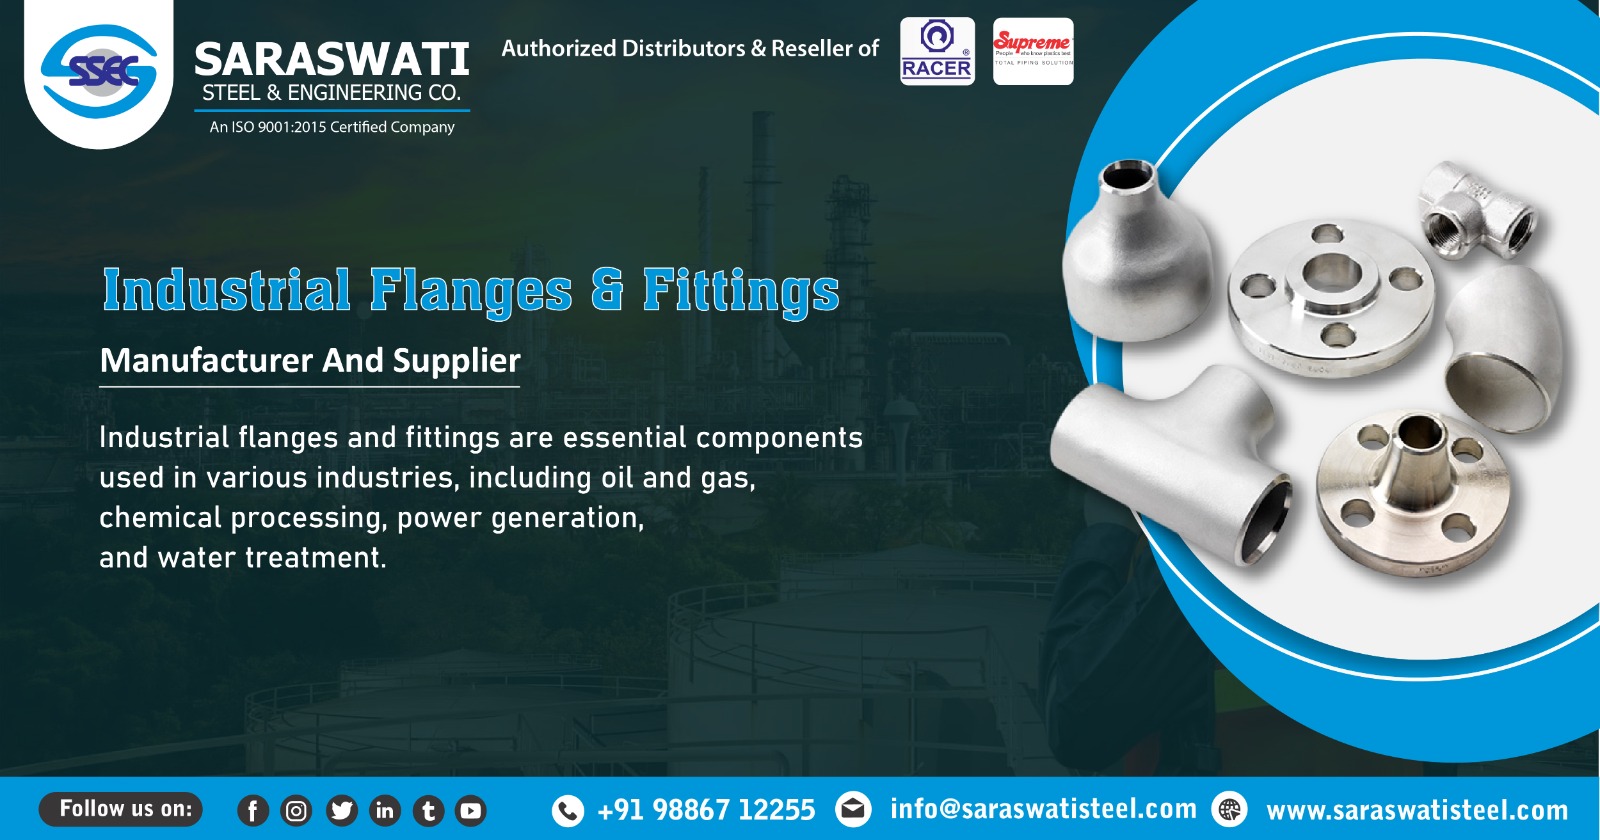 Supplier of Industrial Flanges & Fittings in Visakhapatnam